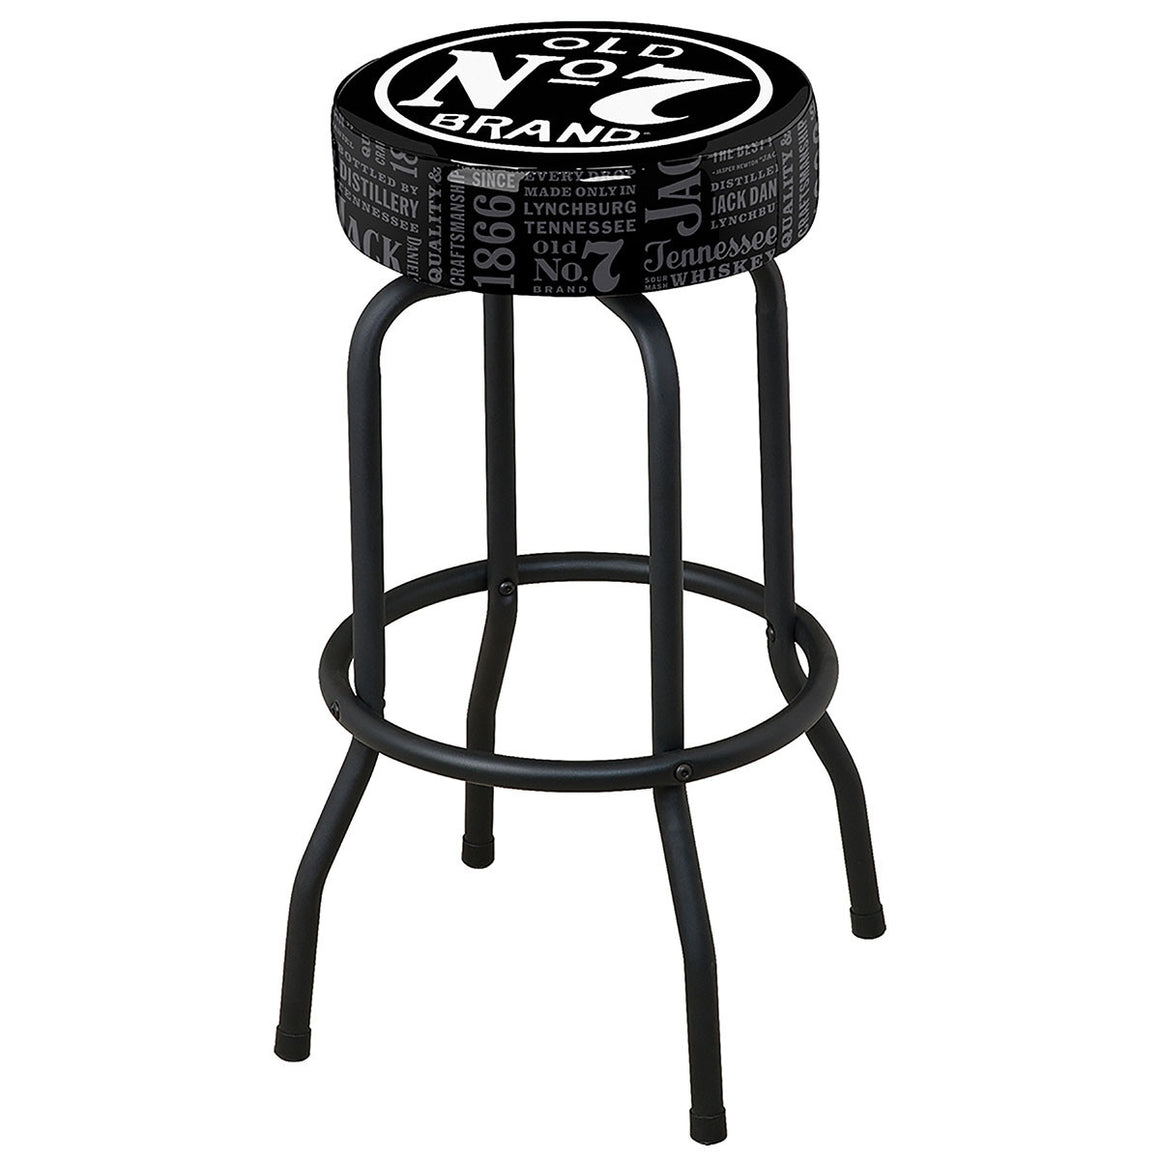 Jack Daniel's® Bar Stool with Old No. 7 Brand Repeat Logo - Man Cave Boutique